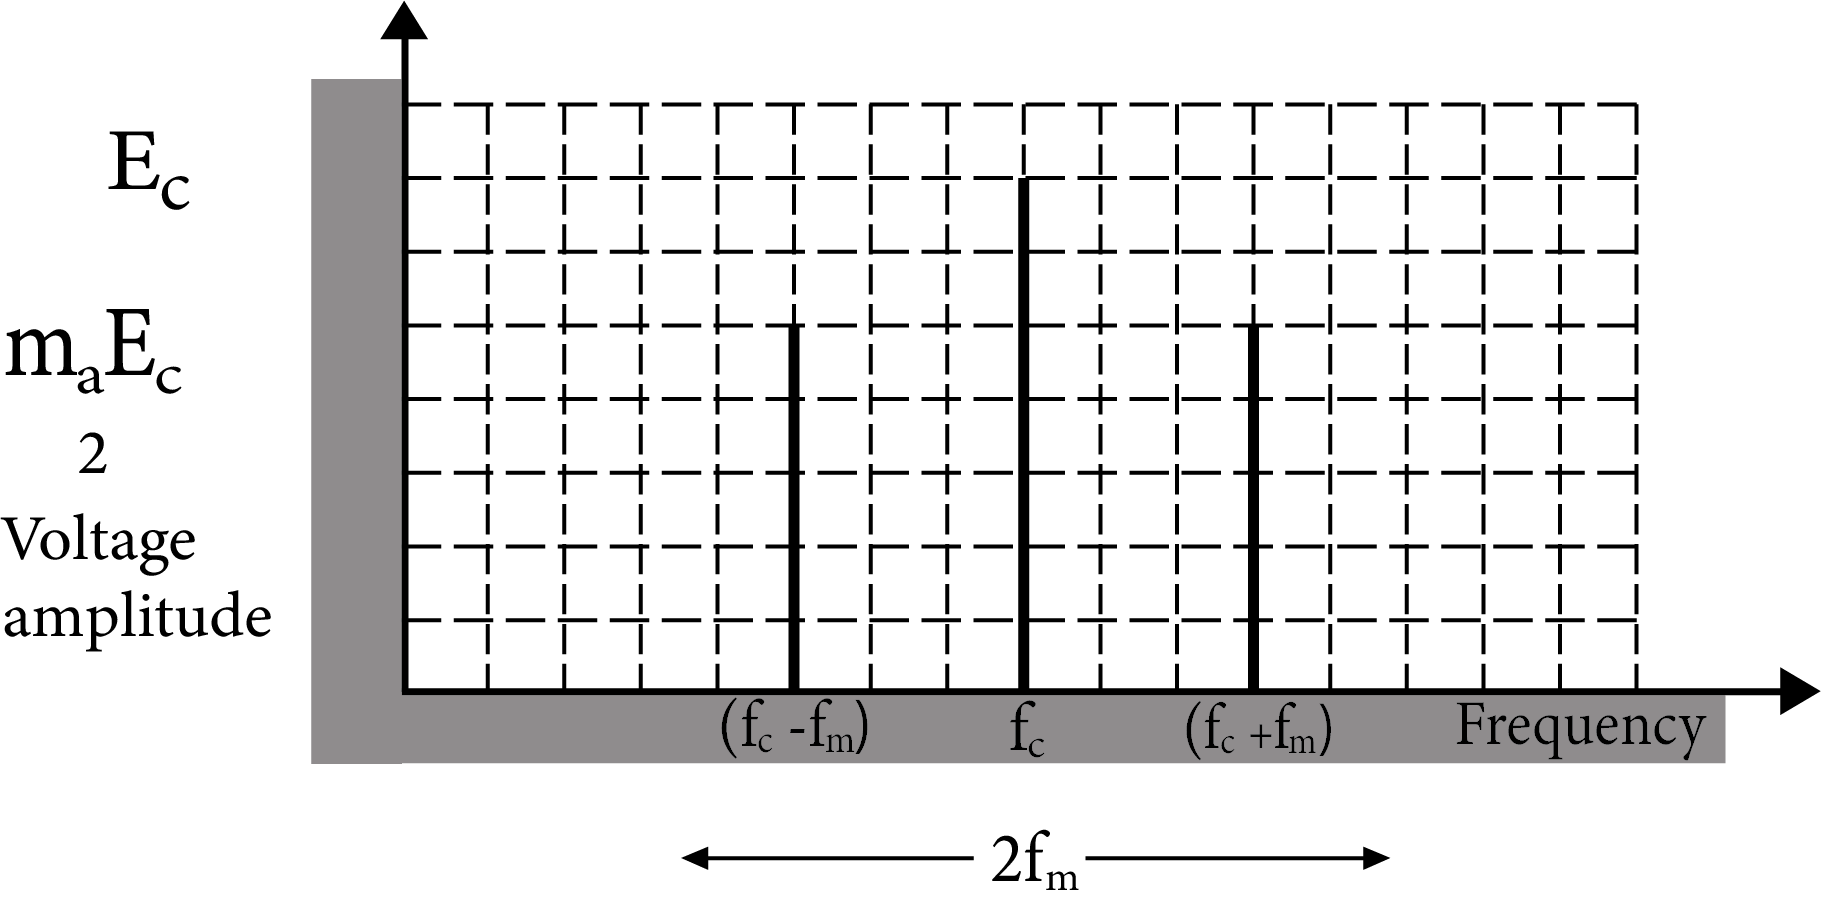 Band width